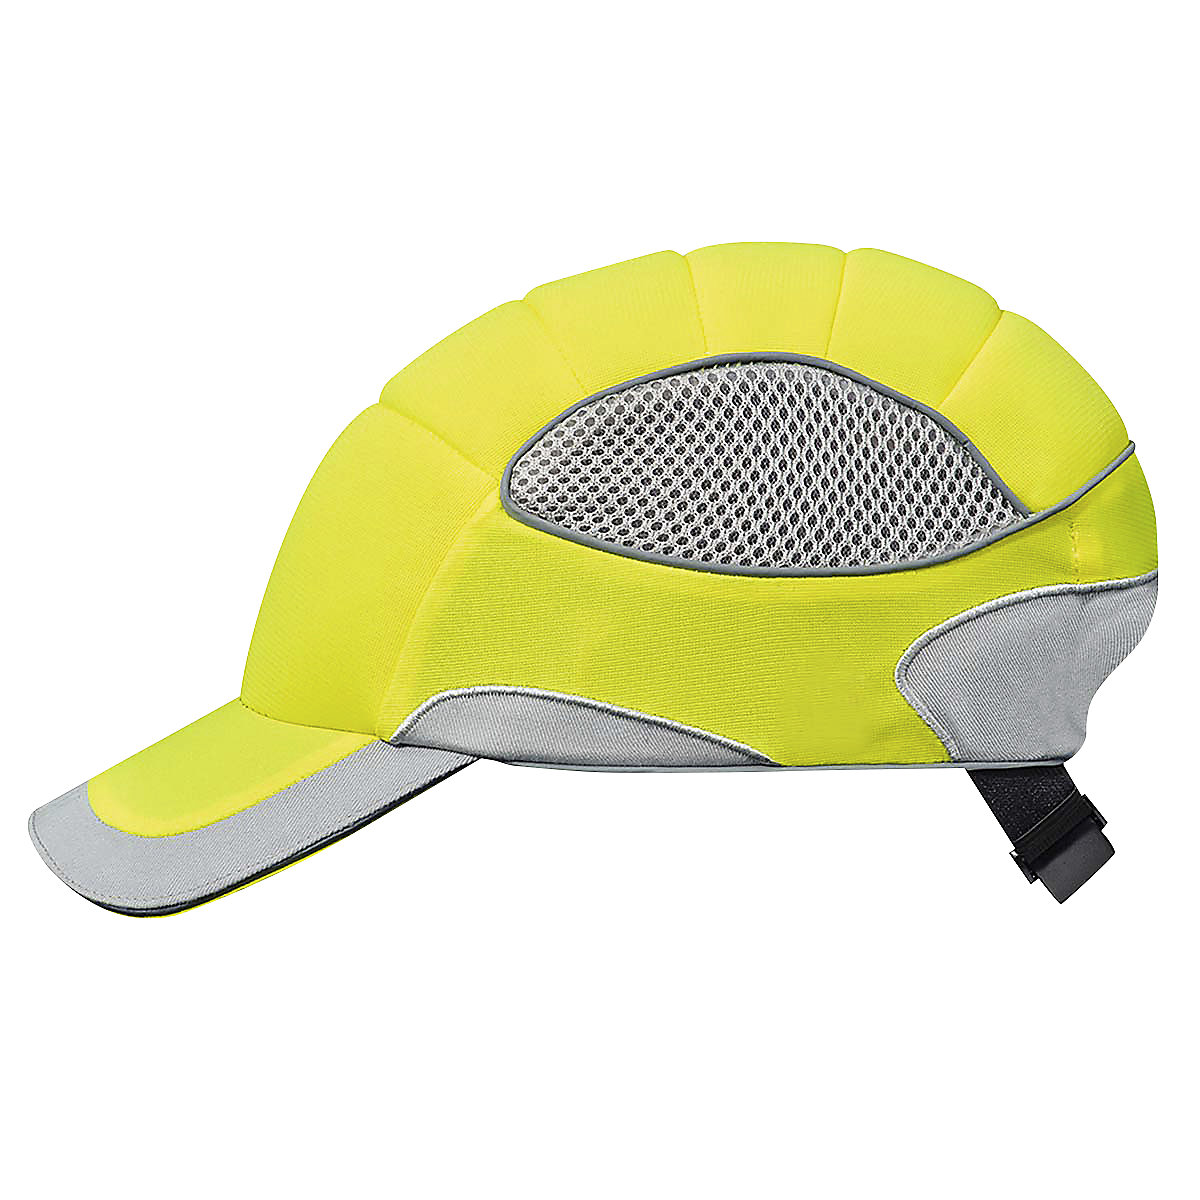 Bump cap with ABS shell - VOSS HELME